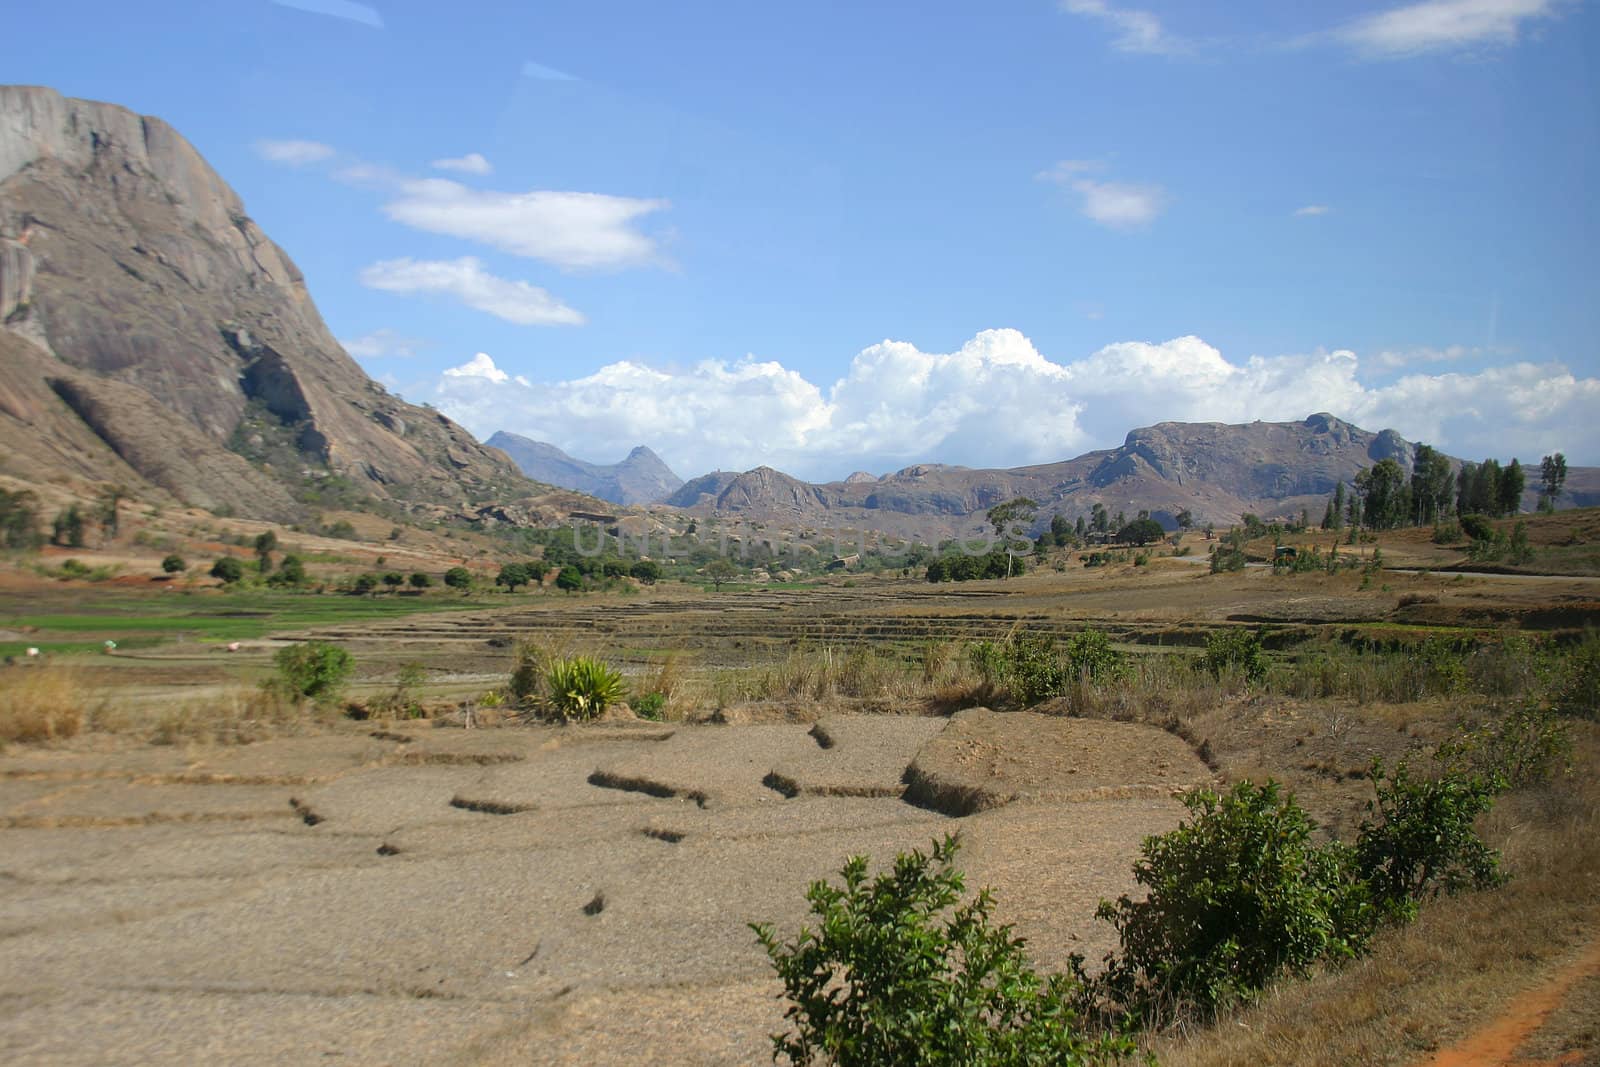 On the road to the Andringitha mountain range in Madagascar